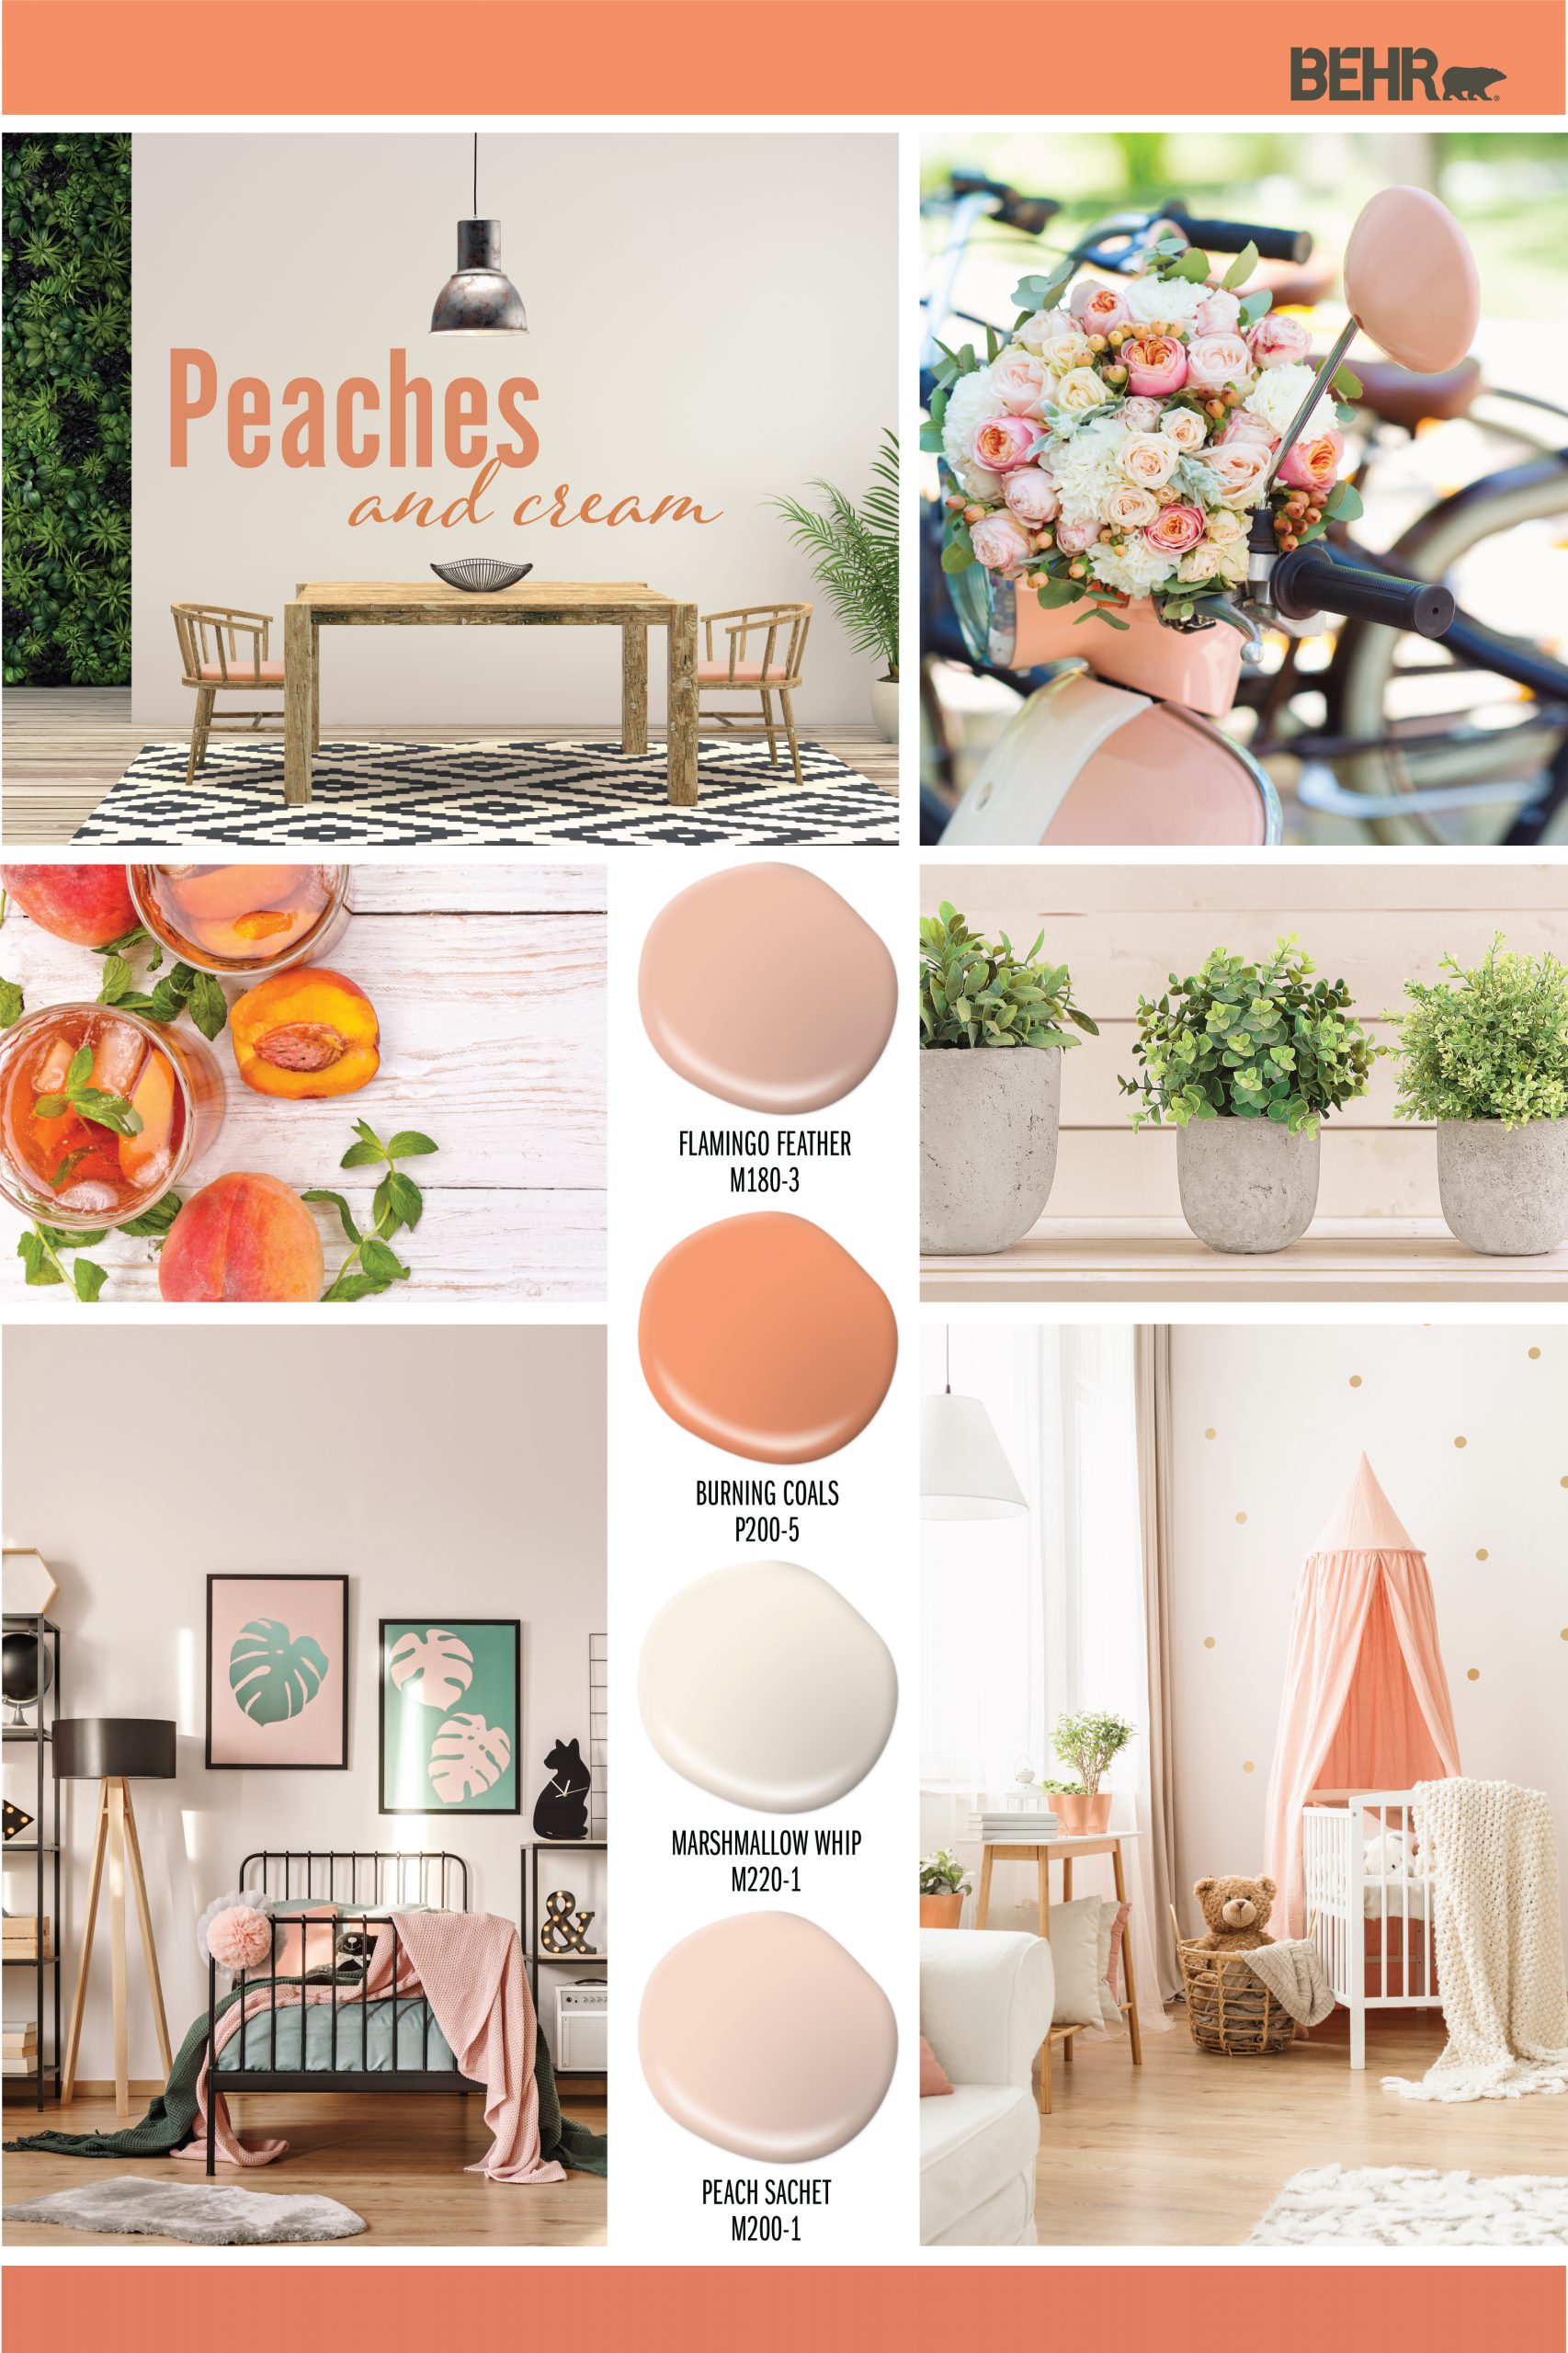 Inspiration Board featuring four peach colored paint drops: Flamingo Feather, Burning Coals, Marshmallow Whip, Peach Sachet Images shown are the following: -Outside dining area with a table and chairs. Cushion on chairs are the paint color Flamingo. The wall behind the table is painted Marshmallow Whip.  -A peach colored bike with a large bouquet on the handle bars -A wood table painted in Peach Sachet with peach iced tea and cut peaches placed on it. -Three vases filled with green plants. Wall behind it is painted in Peach Sachet -A bedroom with peach and green accents. Walls are painted in Peach Sachet. -A nursery with accents in Burning Coals. Walls are painted in Marshmallow Whip with gold dots.